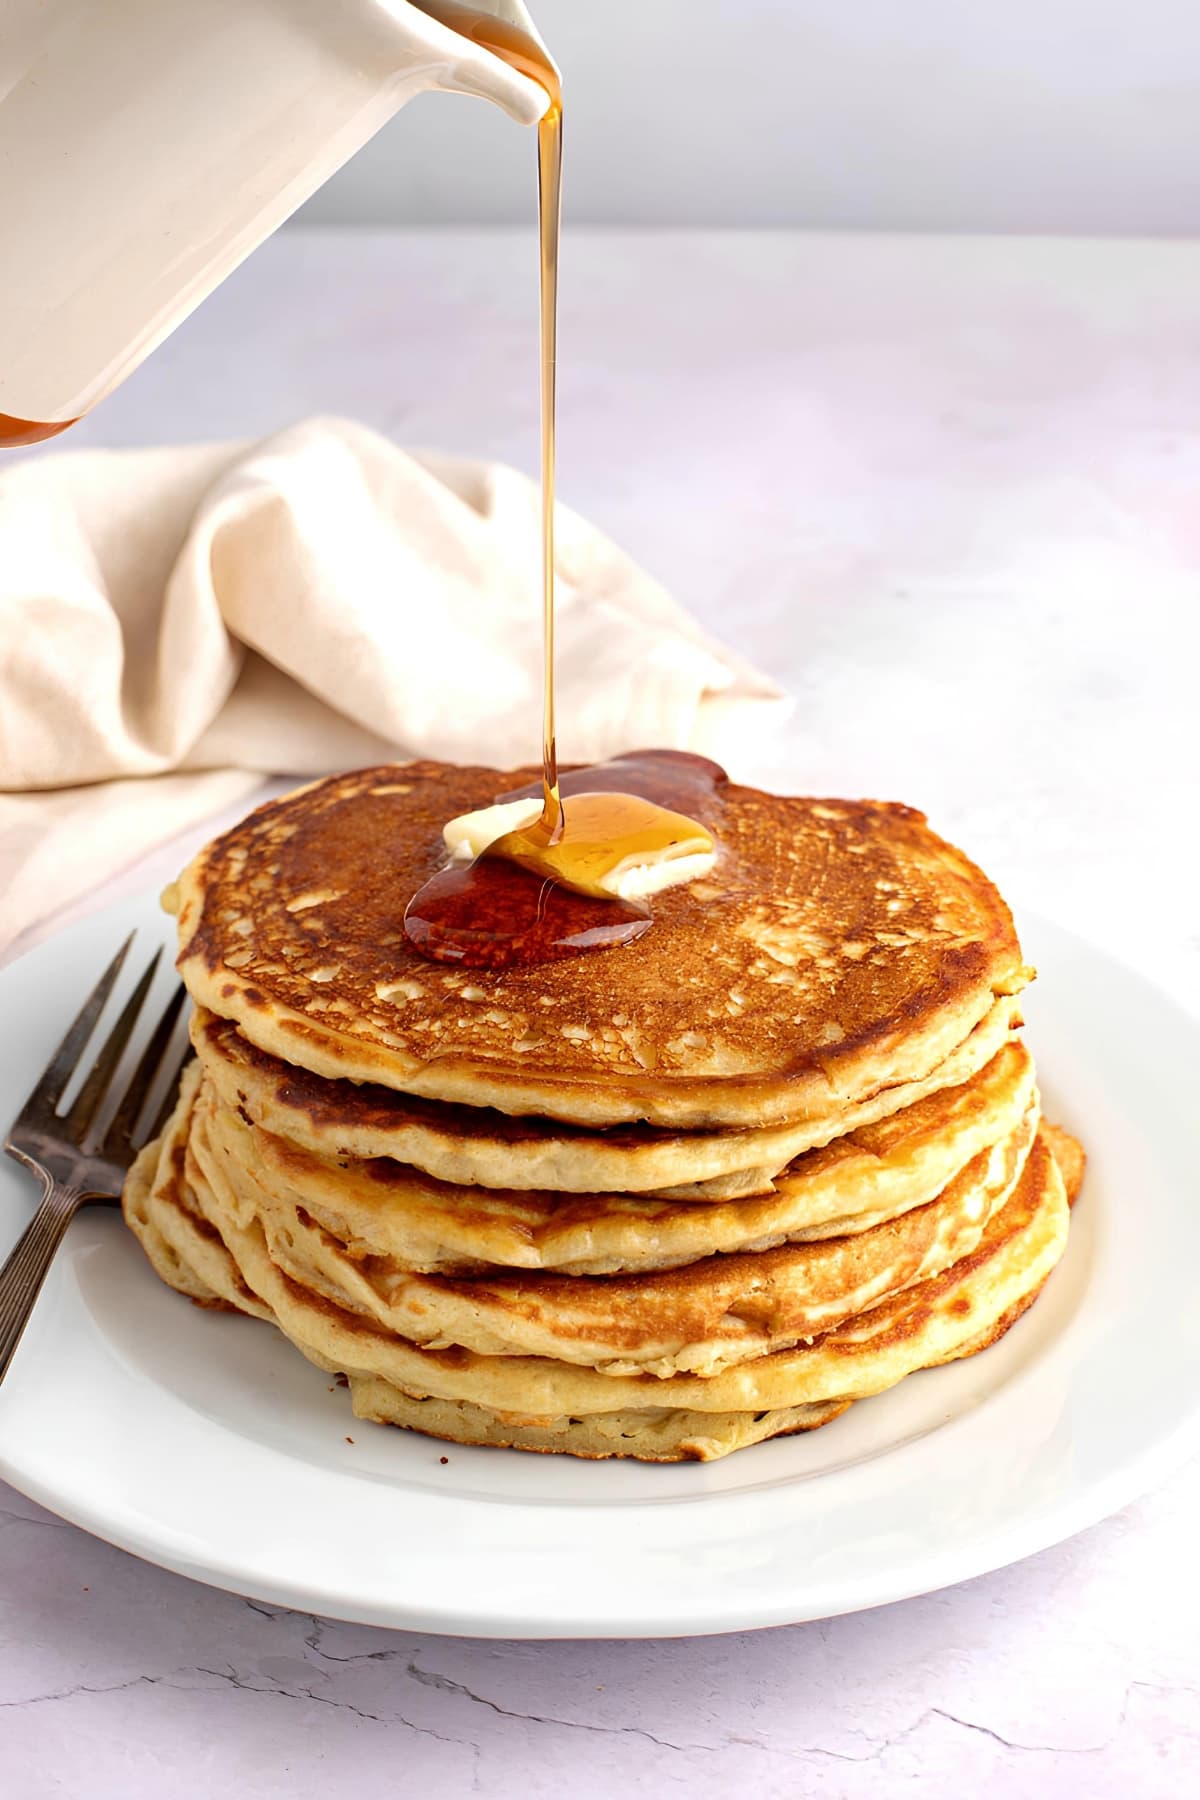 Syrup Pouring on Buttermilk Pancakes With Butter on Top